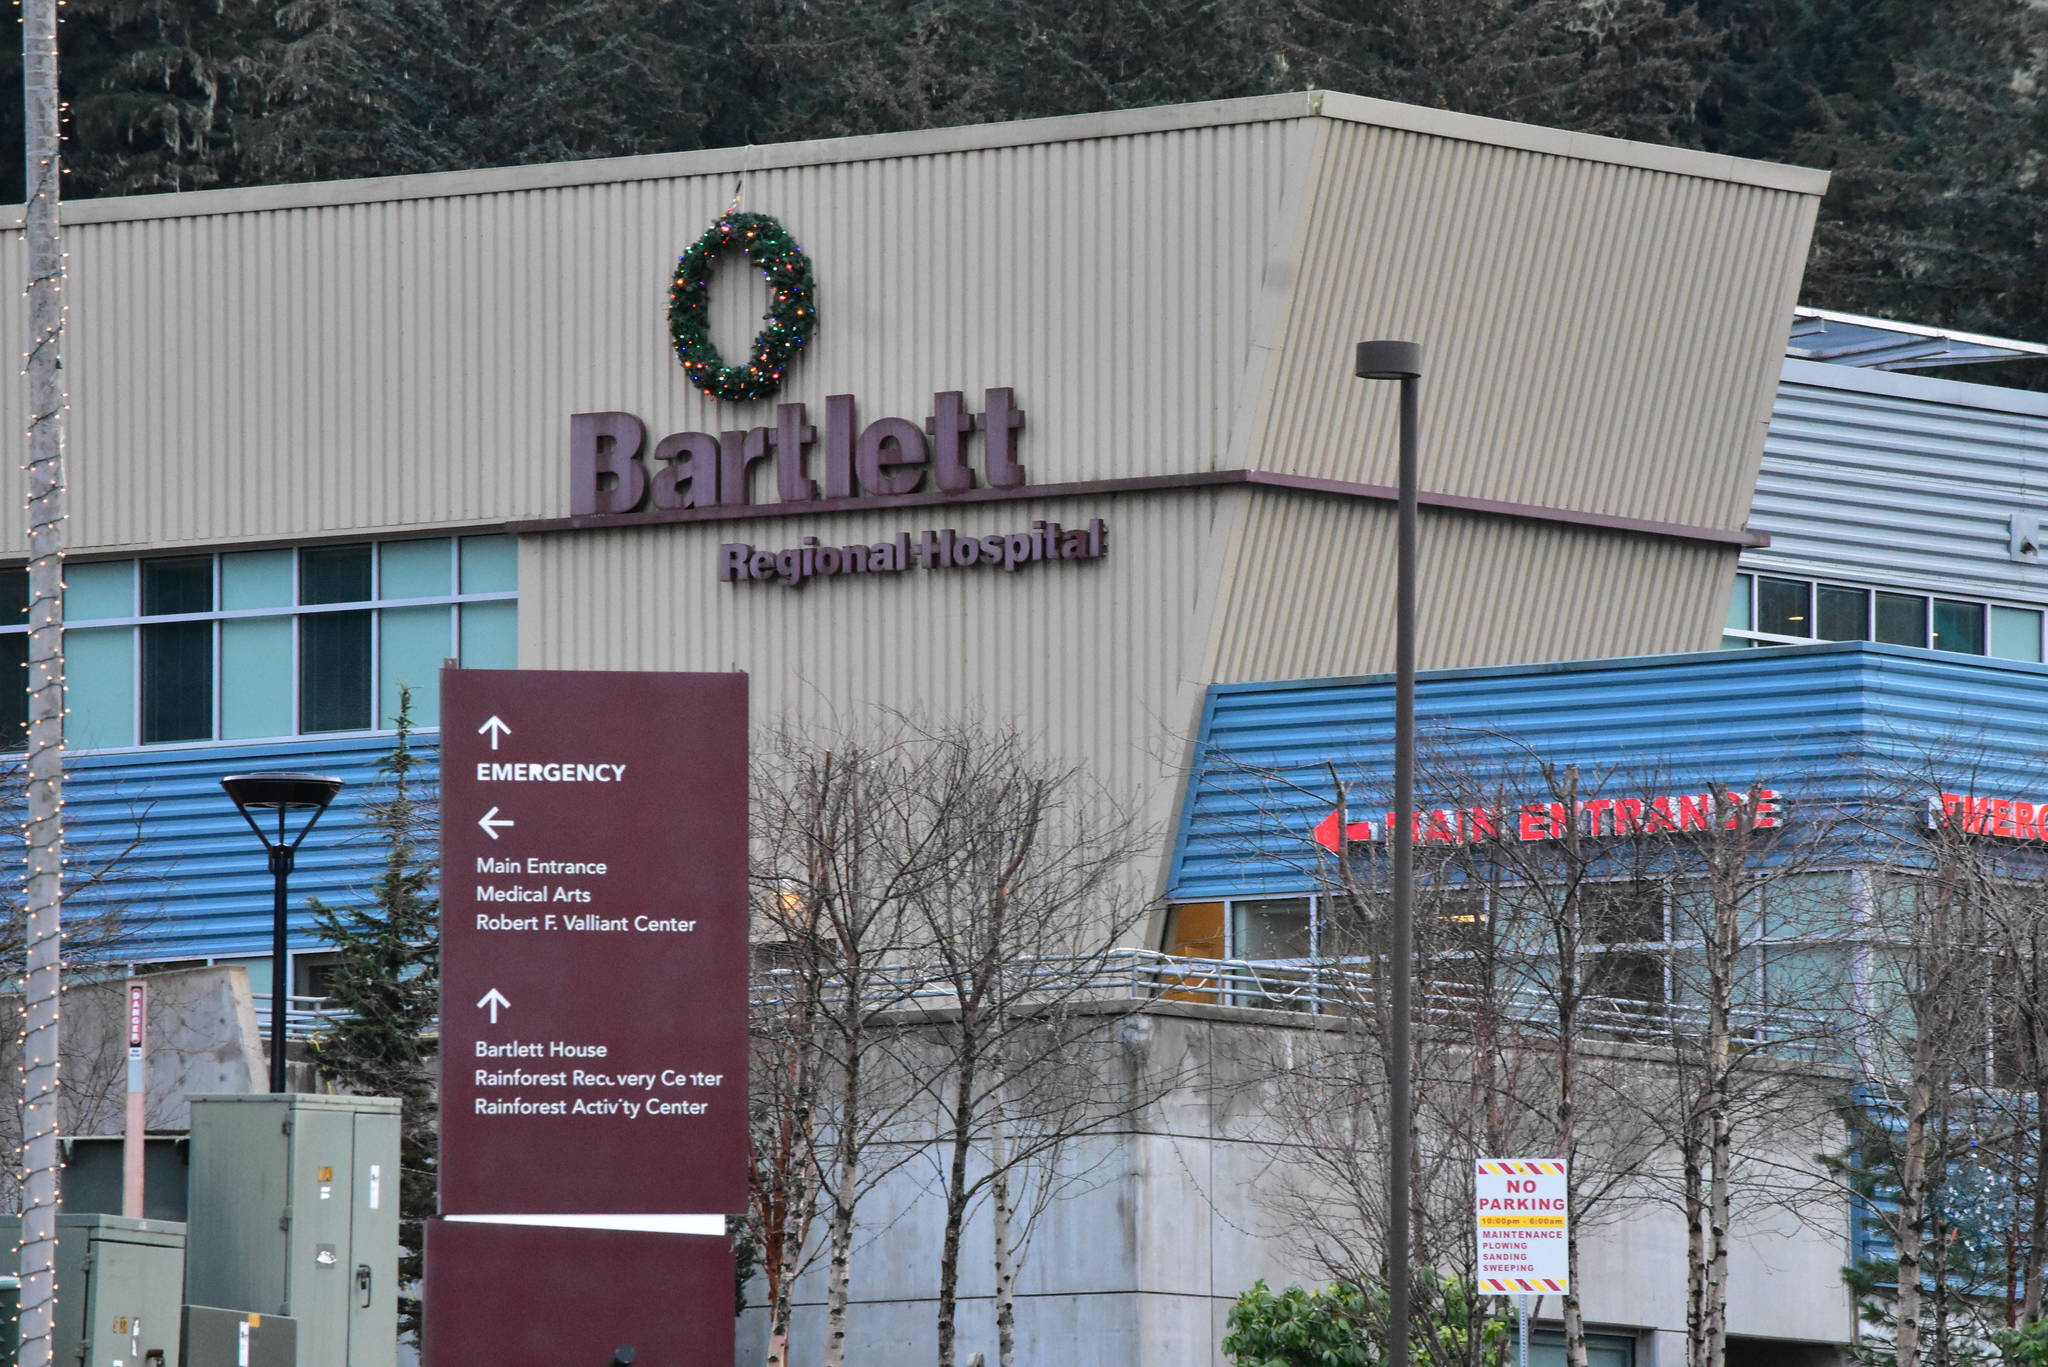 Staff at Bartlett Regional Hospital, seen here on Thursday, Dec. 10, 2020, will be among some of the first to receive a vaccine for COVID-19 once federal authorities give the go-ahead. (Peter Segall / Juneau Empire)